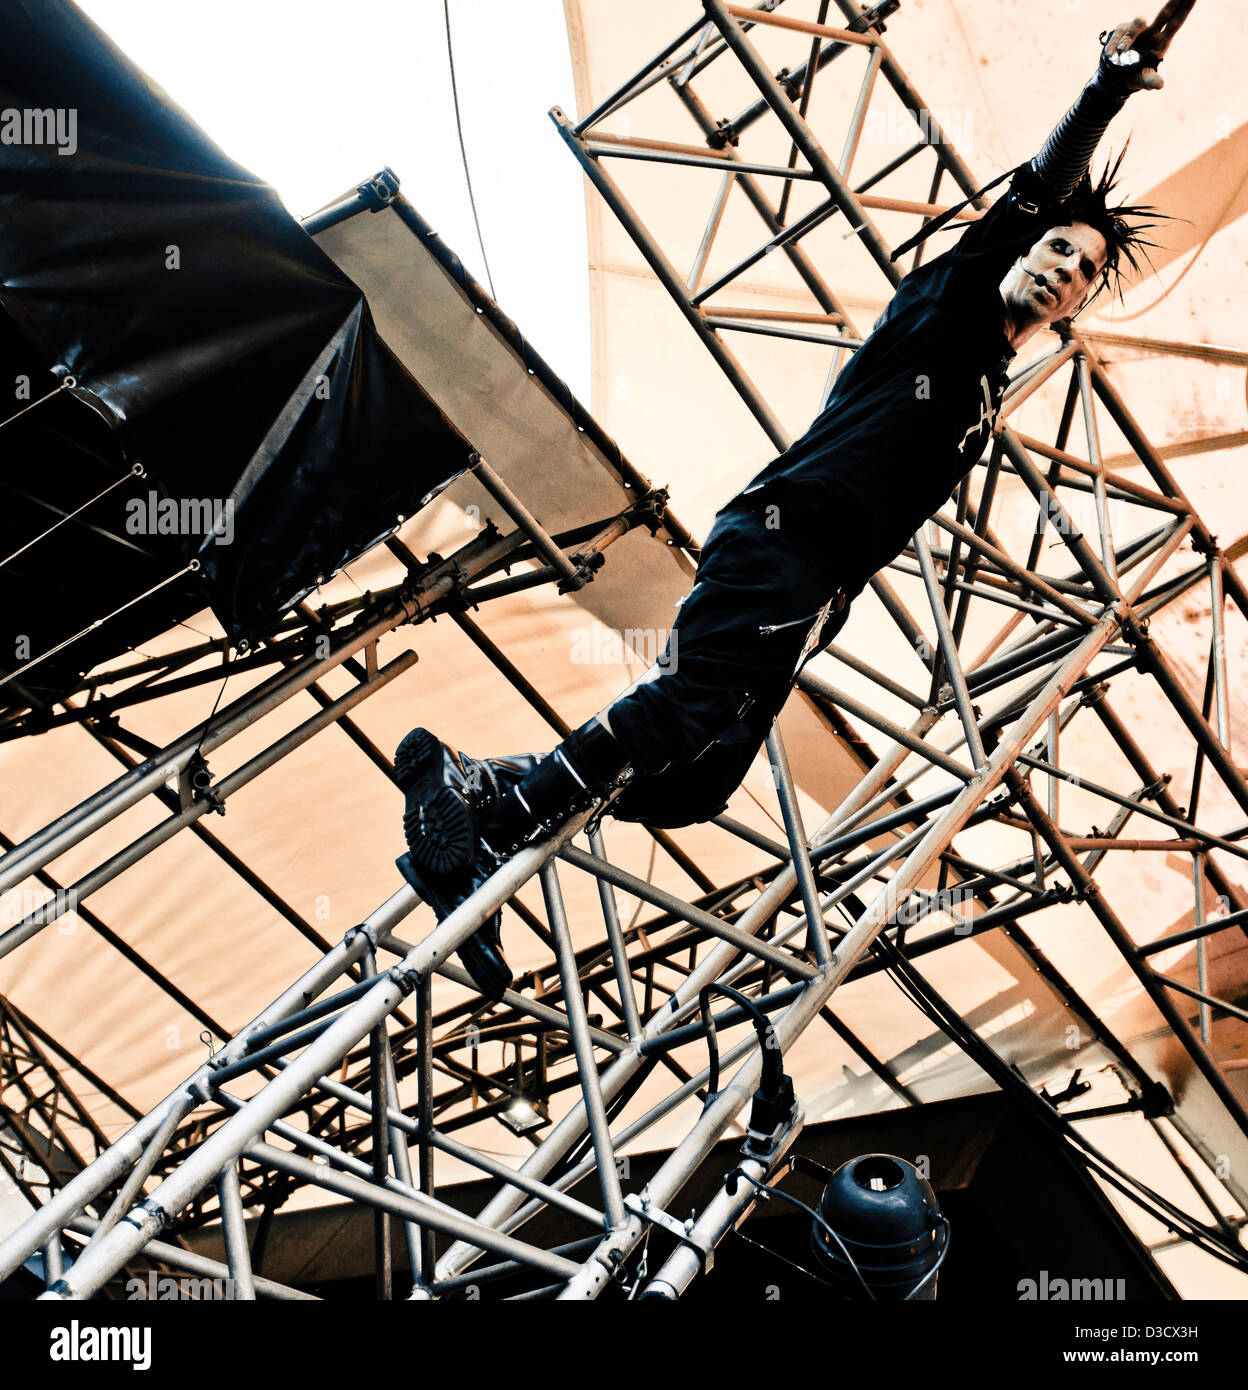 Rogue of the darkwave band The Crüxshadows climbing the stage rigging at the Amphi Festival in Cologne 2012 Stock Photo